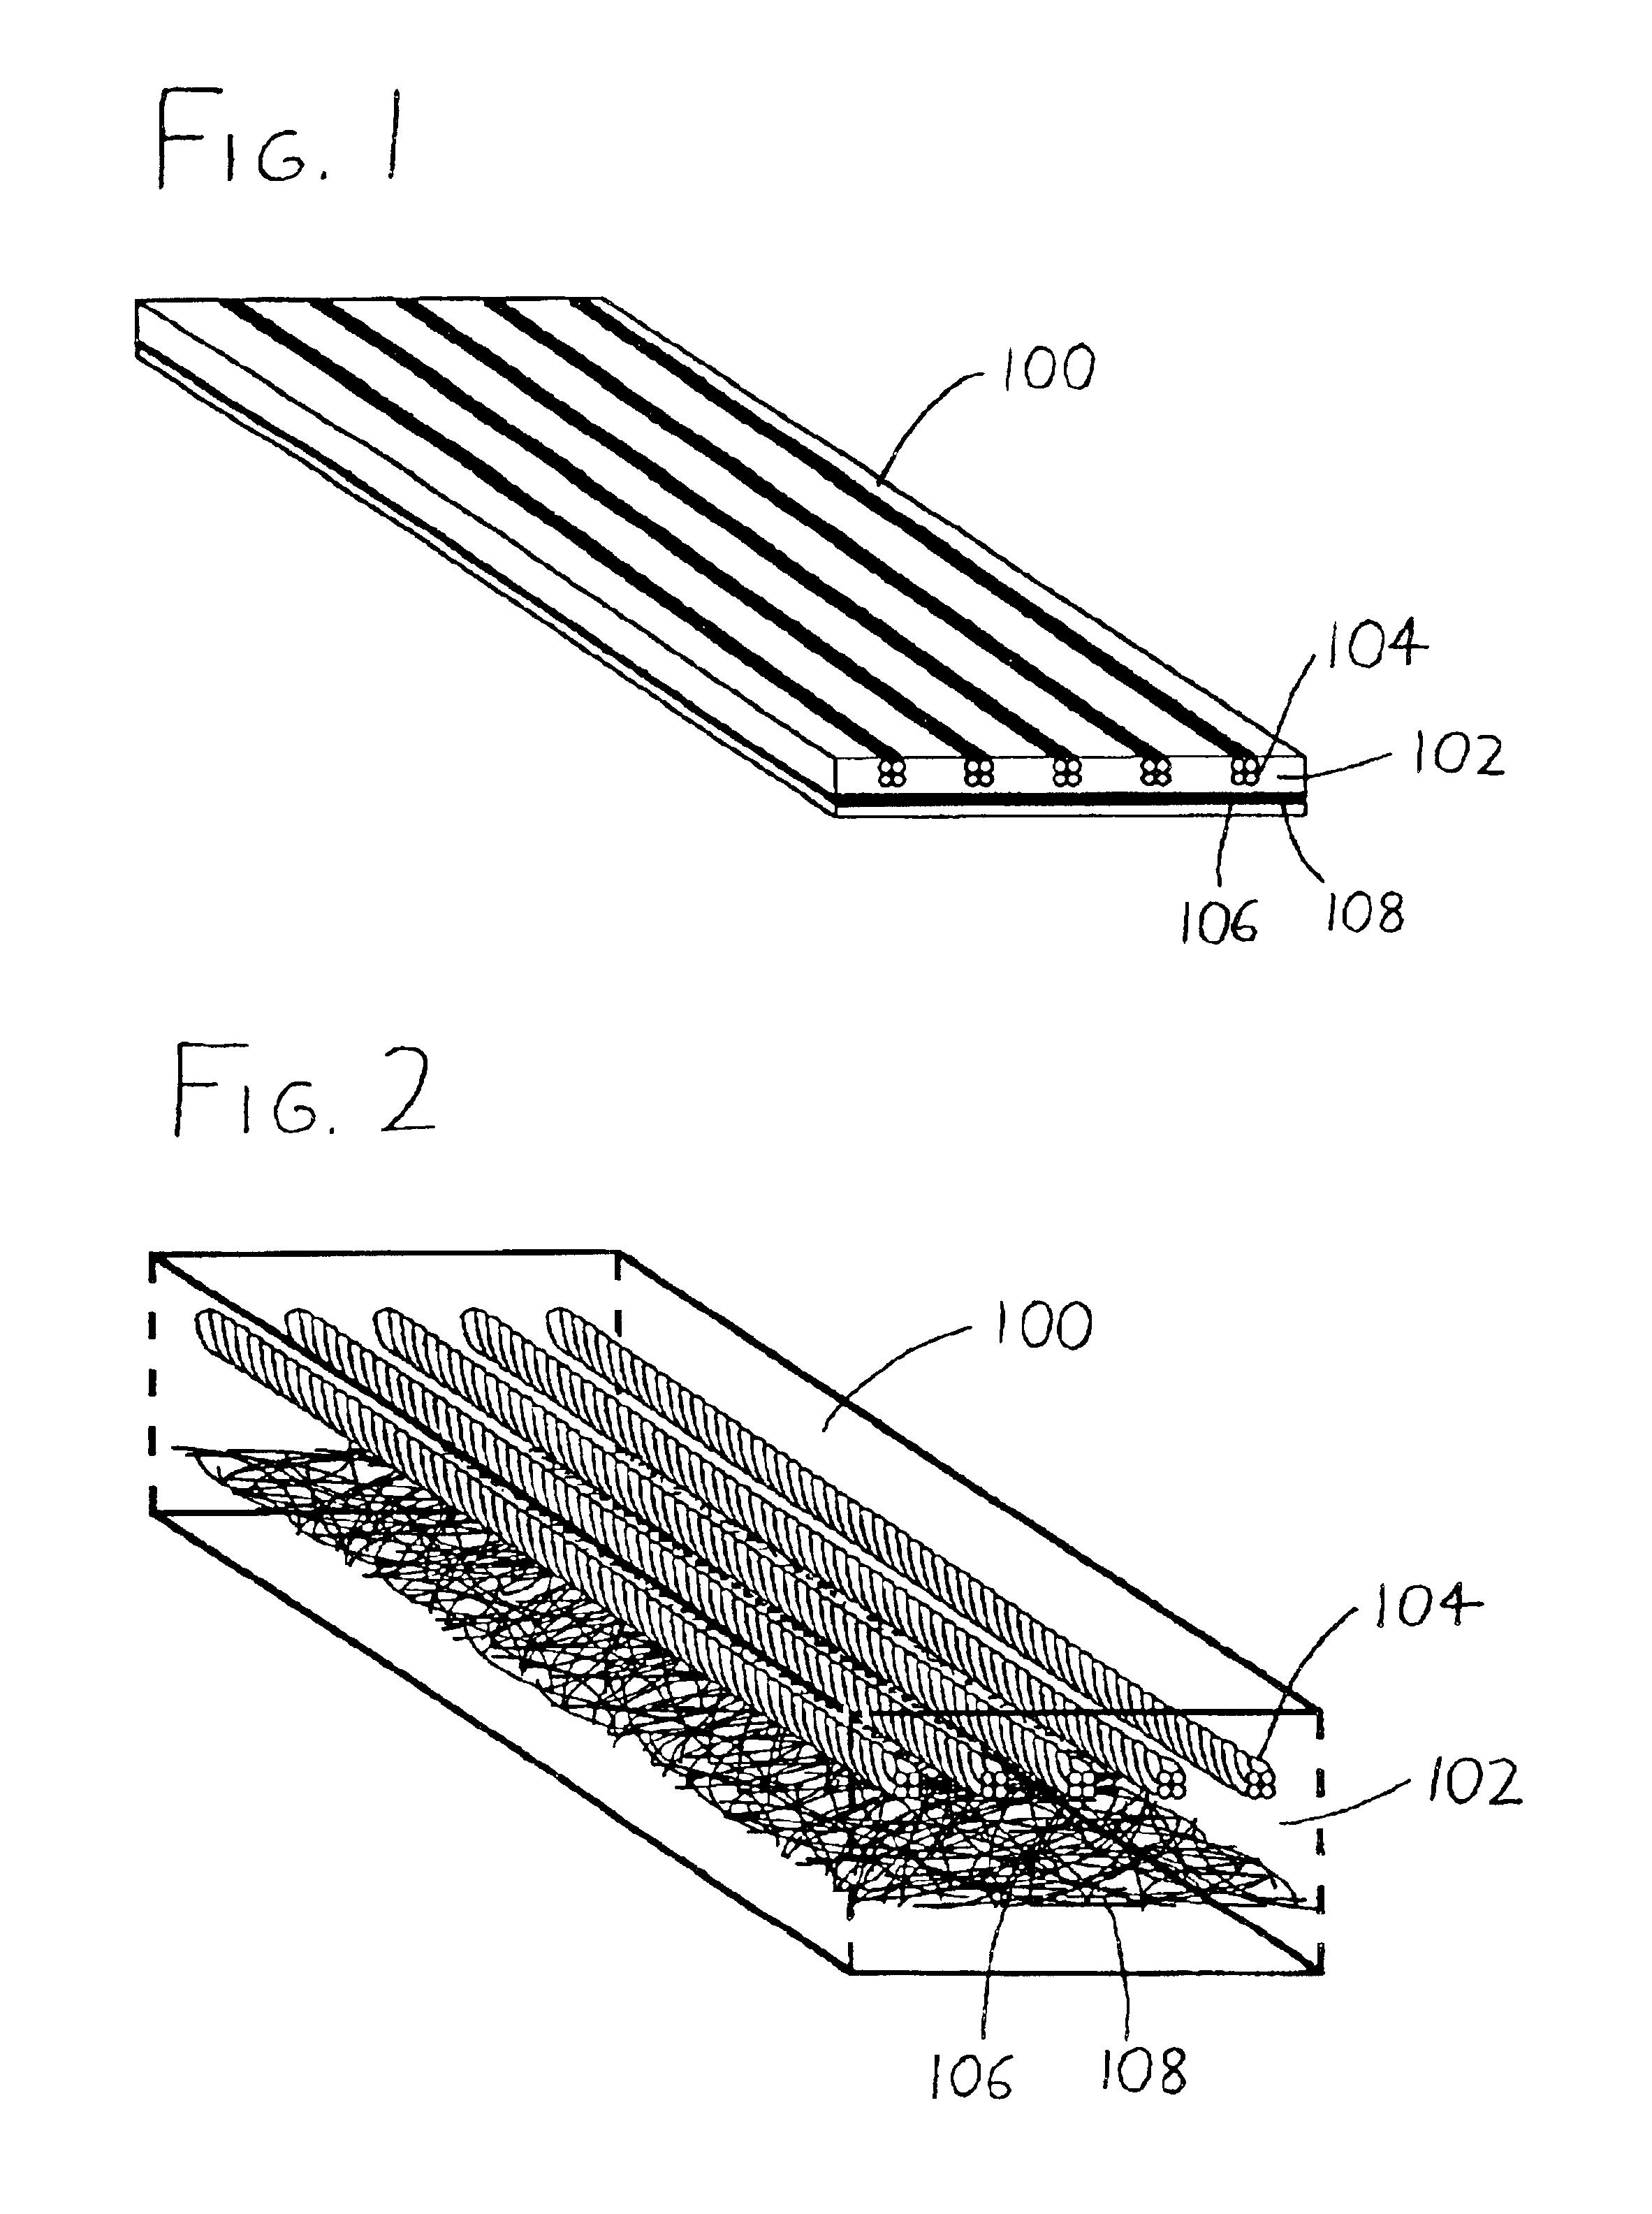 Structural reinforcement using composite strips